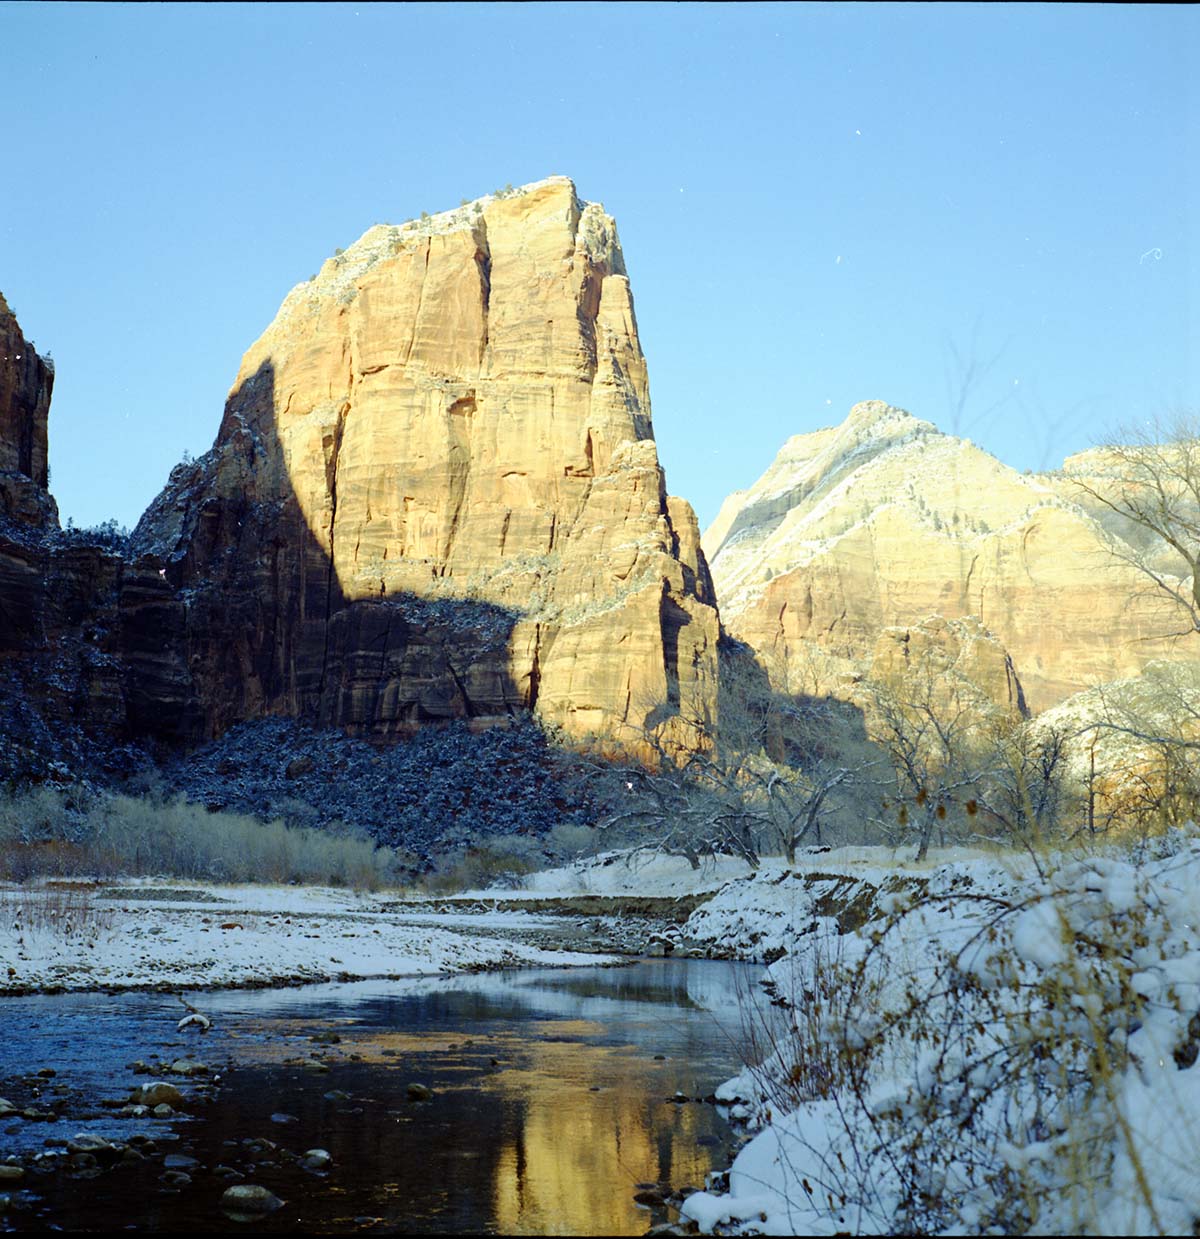 View of Angels Landing from canyon floor, snow along banks of the Virgin River.